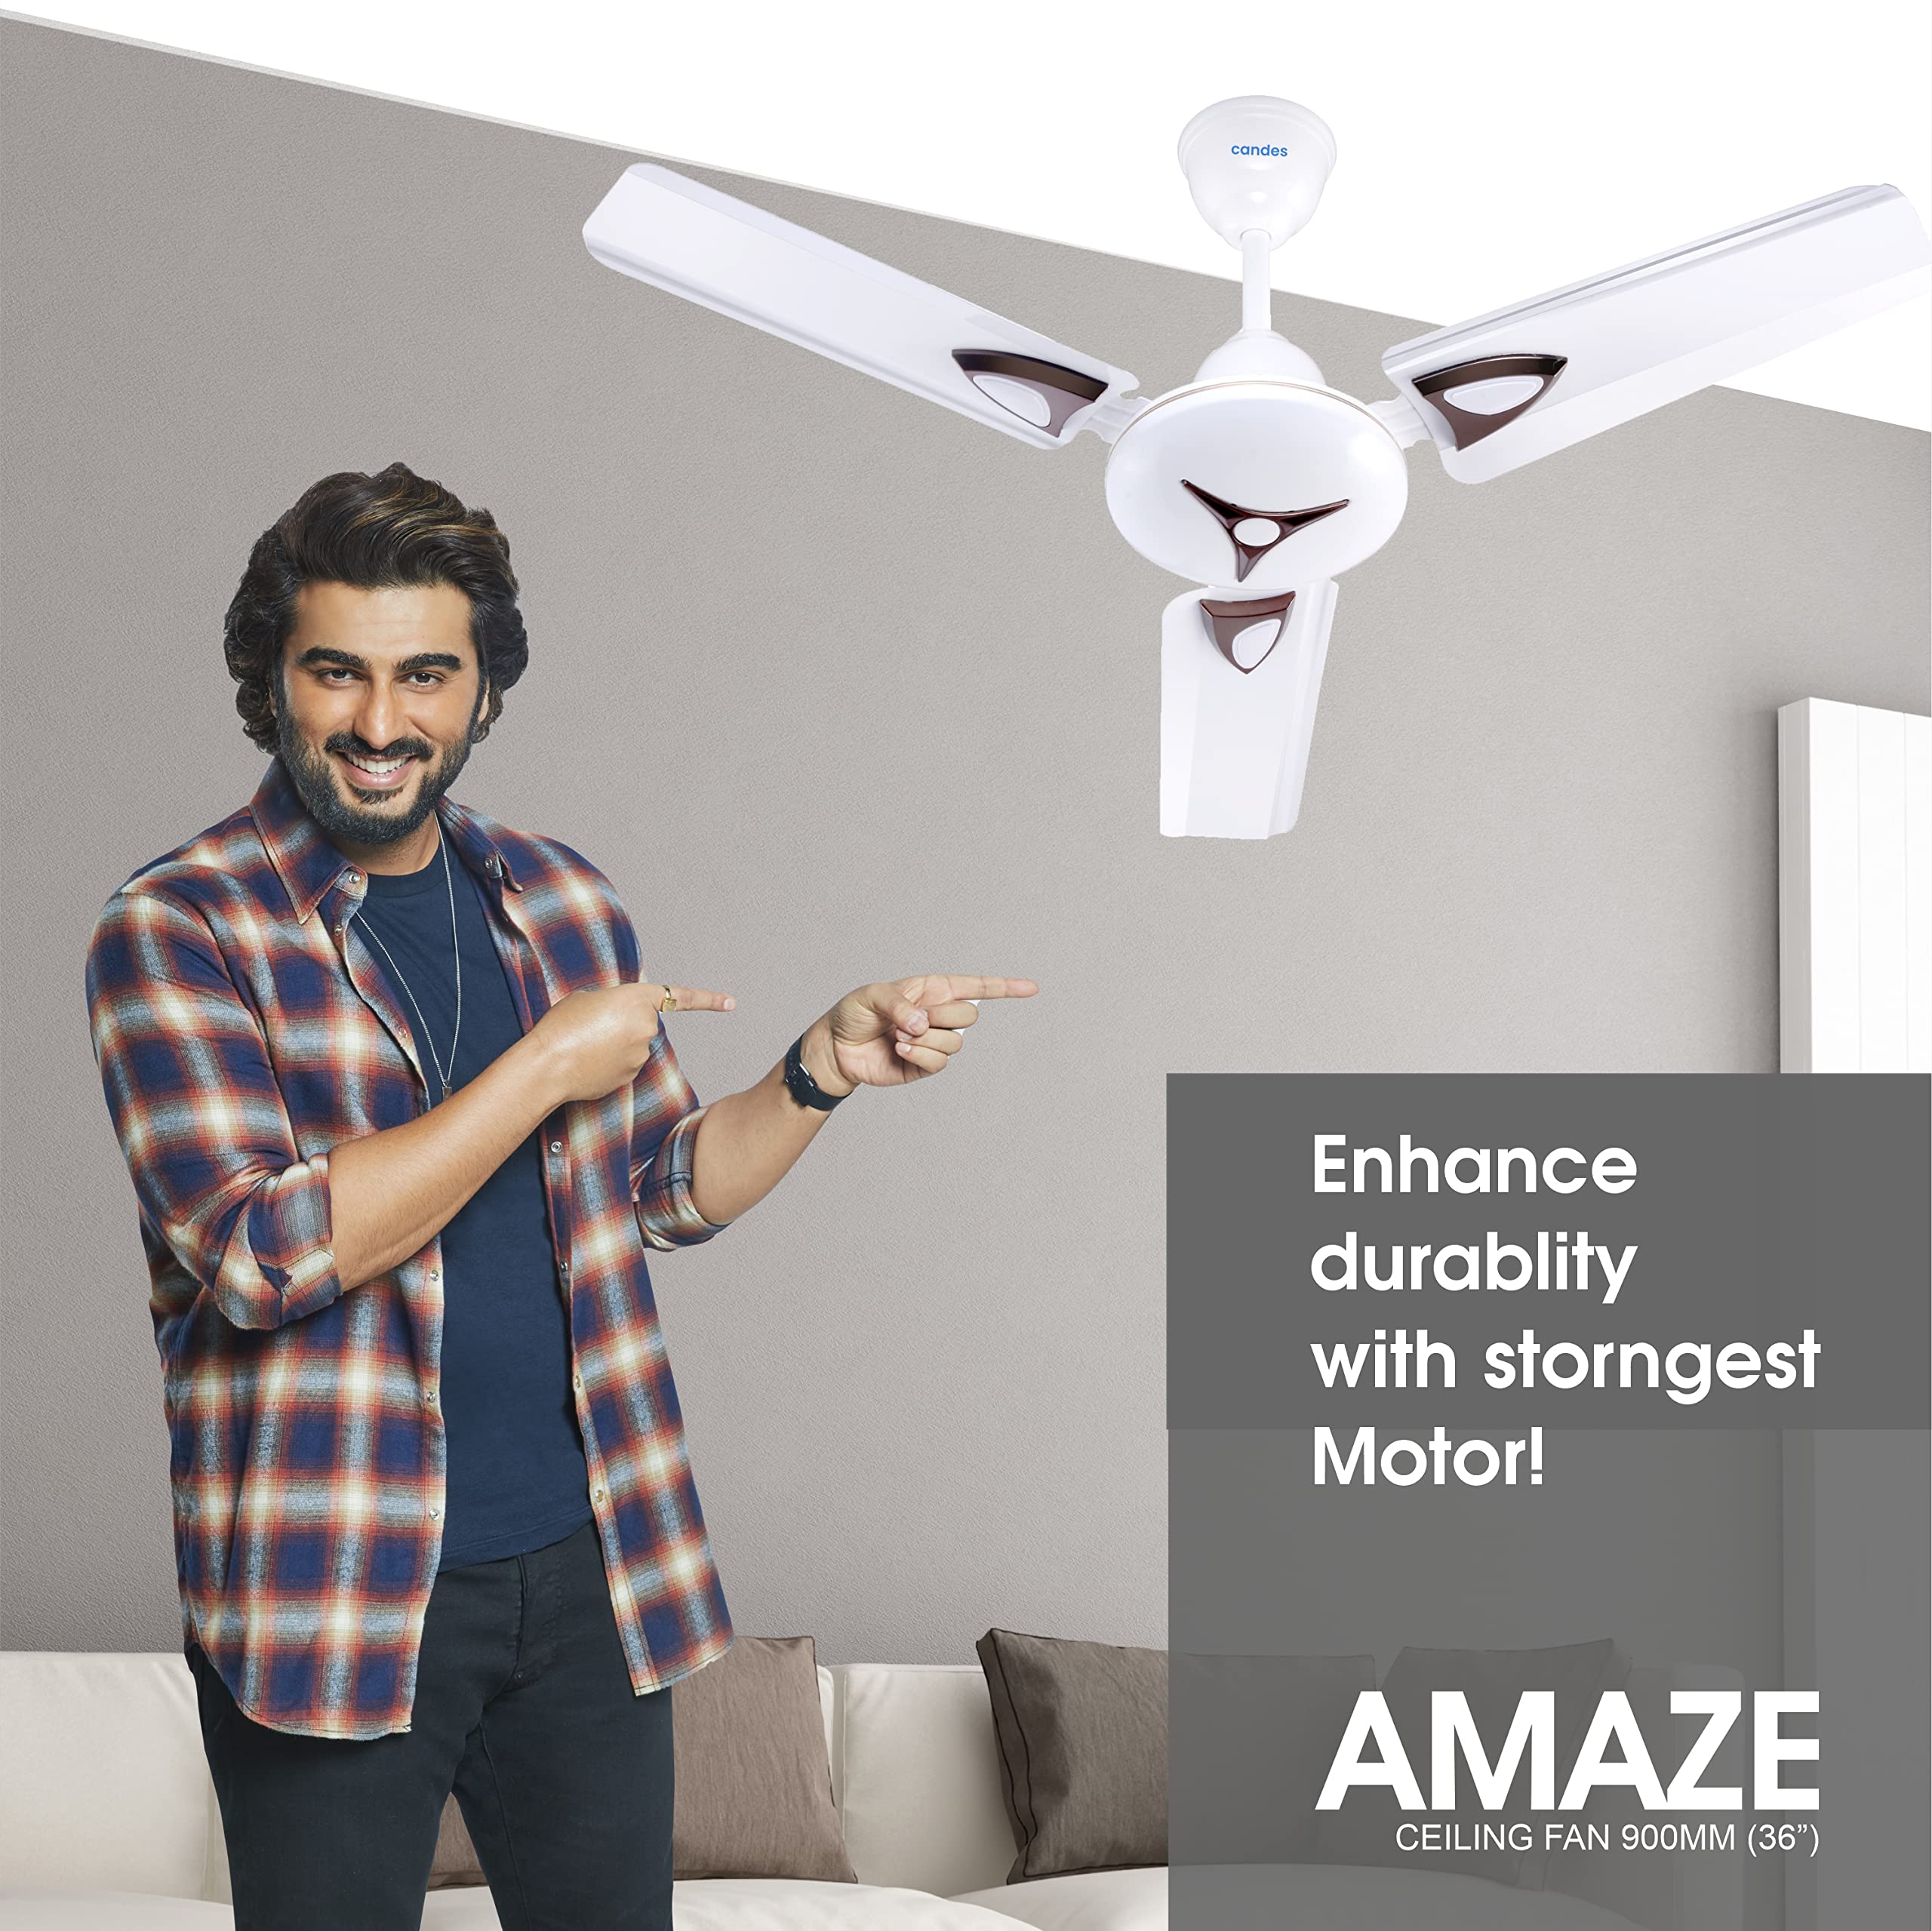 Candes Amaze 900mm /36 inch High Speed Anti-dust Decorative 5 Star Rated Ceiling Fan 440 RPM with 2 Years Warranty (Pack of 2, Ivory)